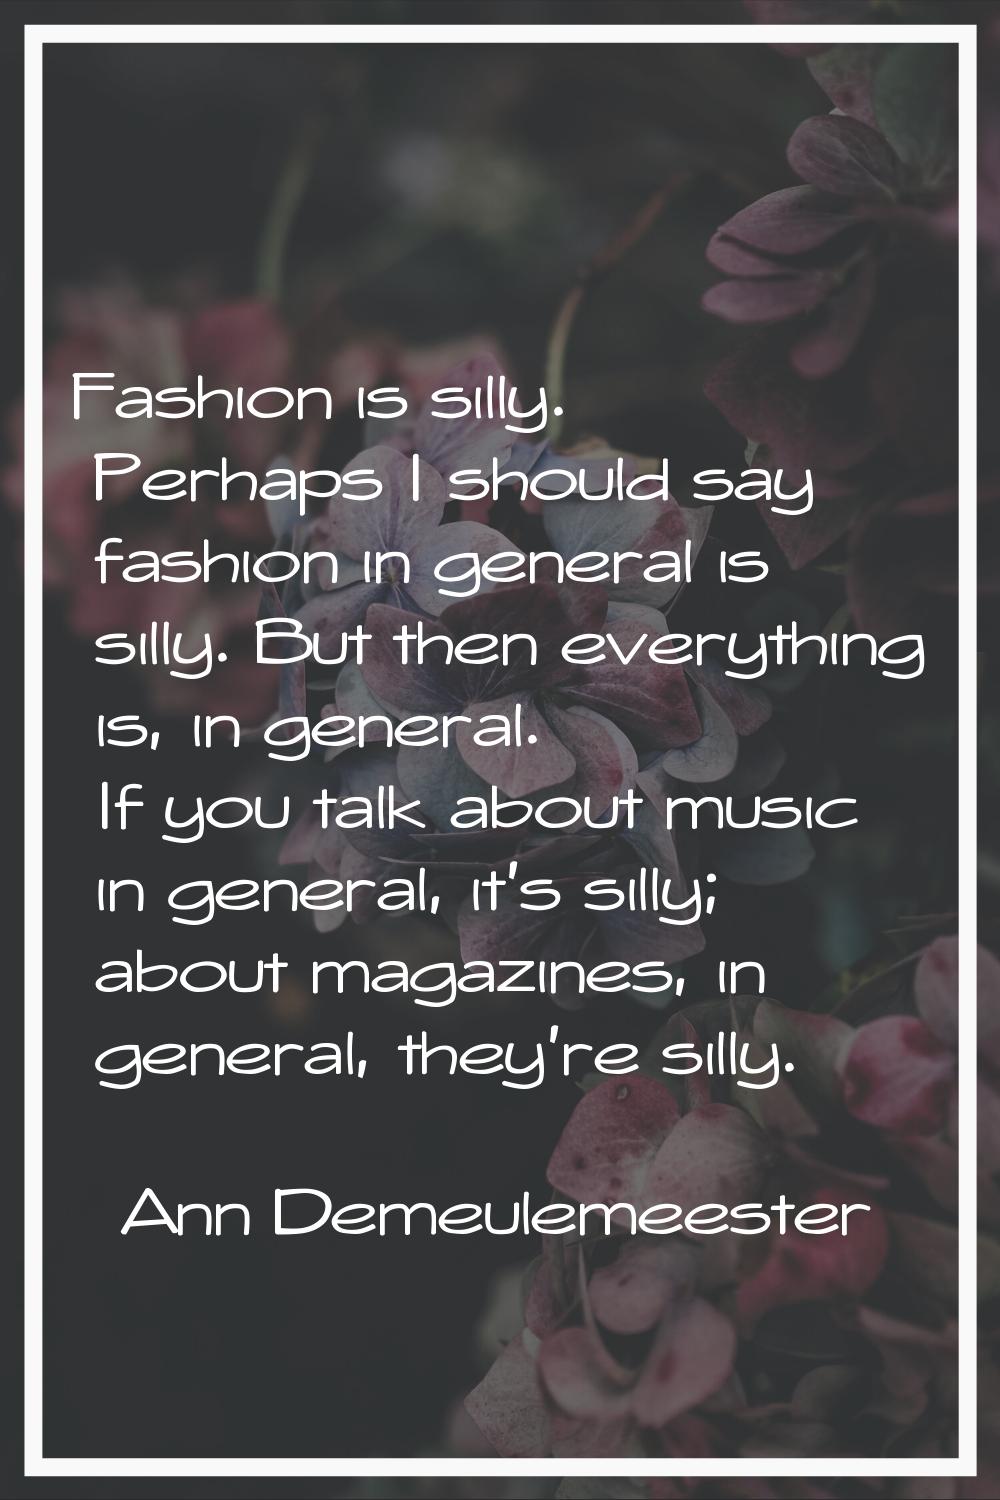 Fashion is silly. Perhaps I should say fashion in general is silly. But then everything is, in gene